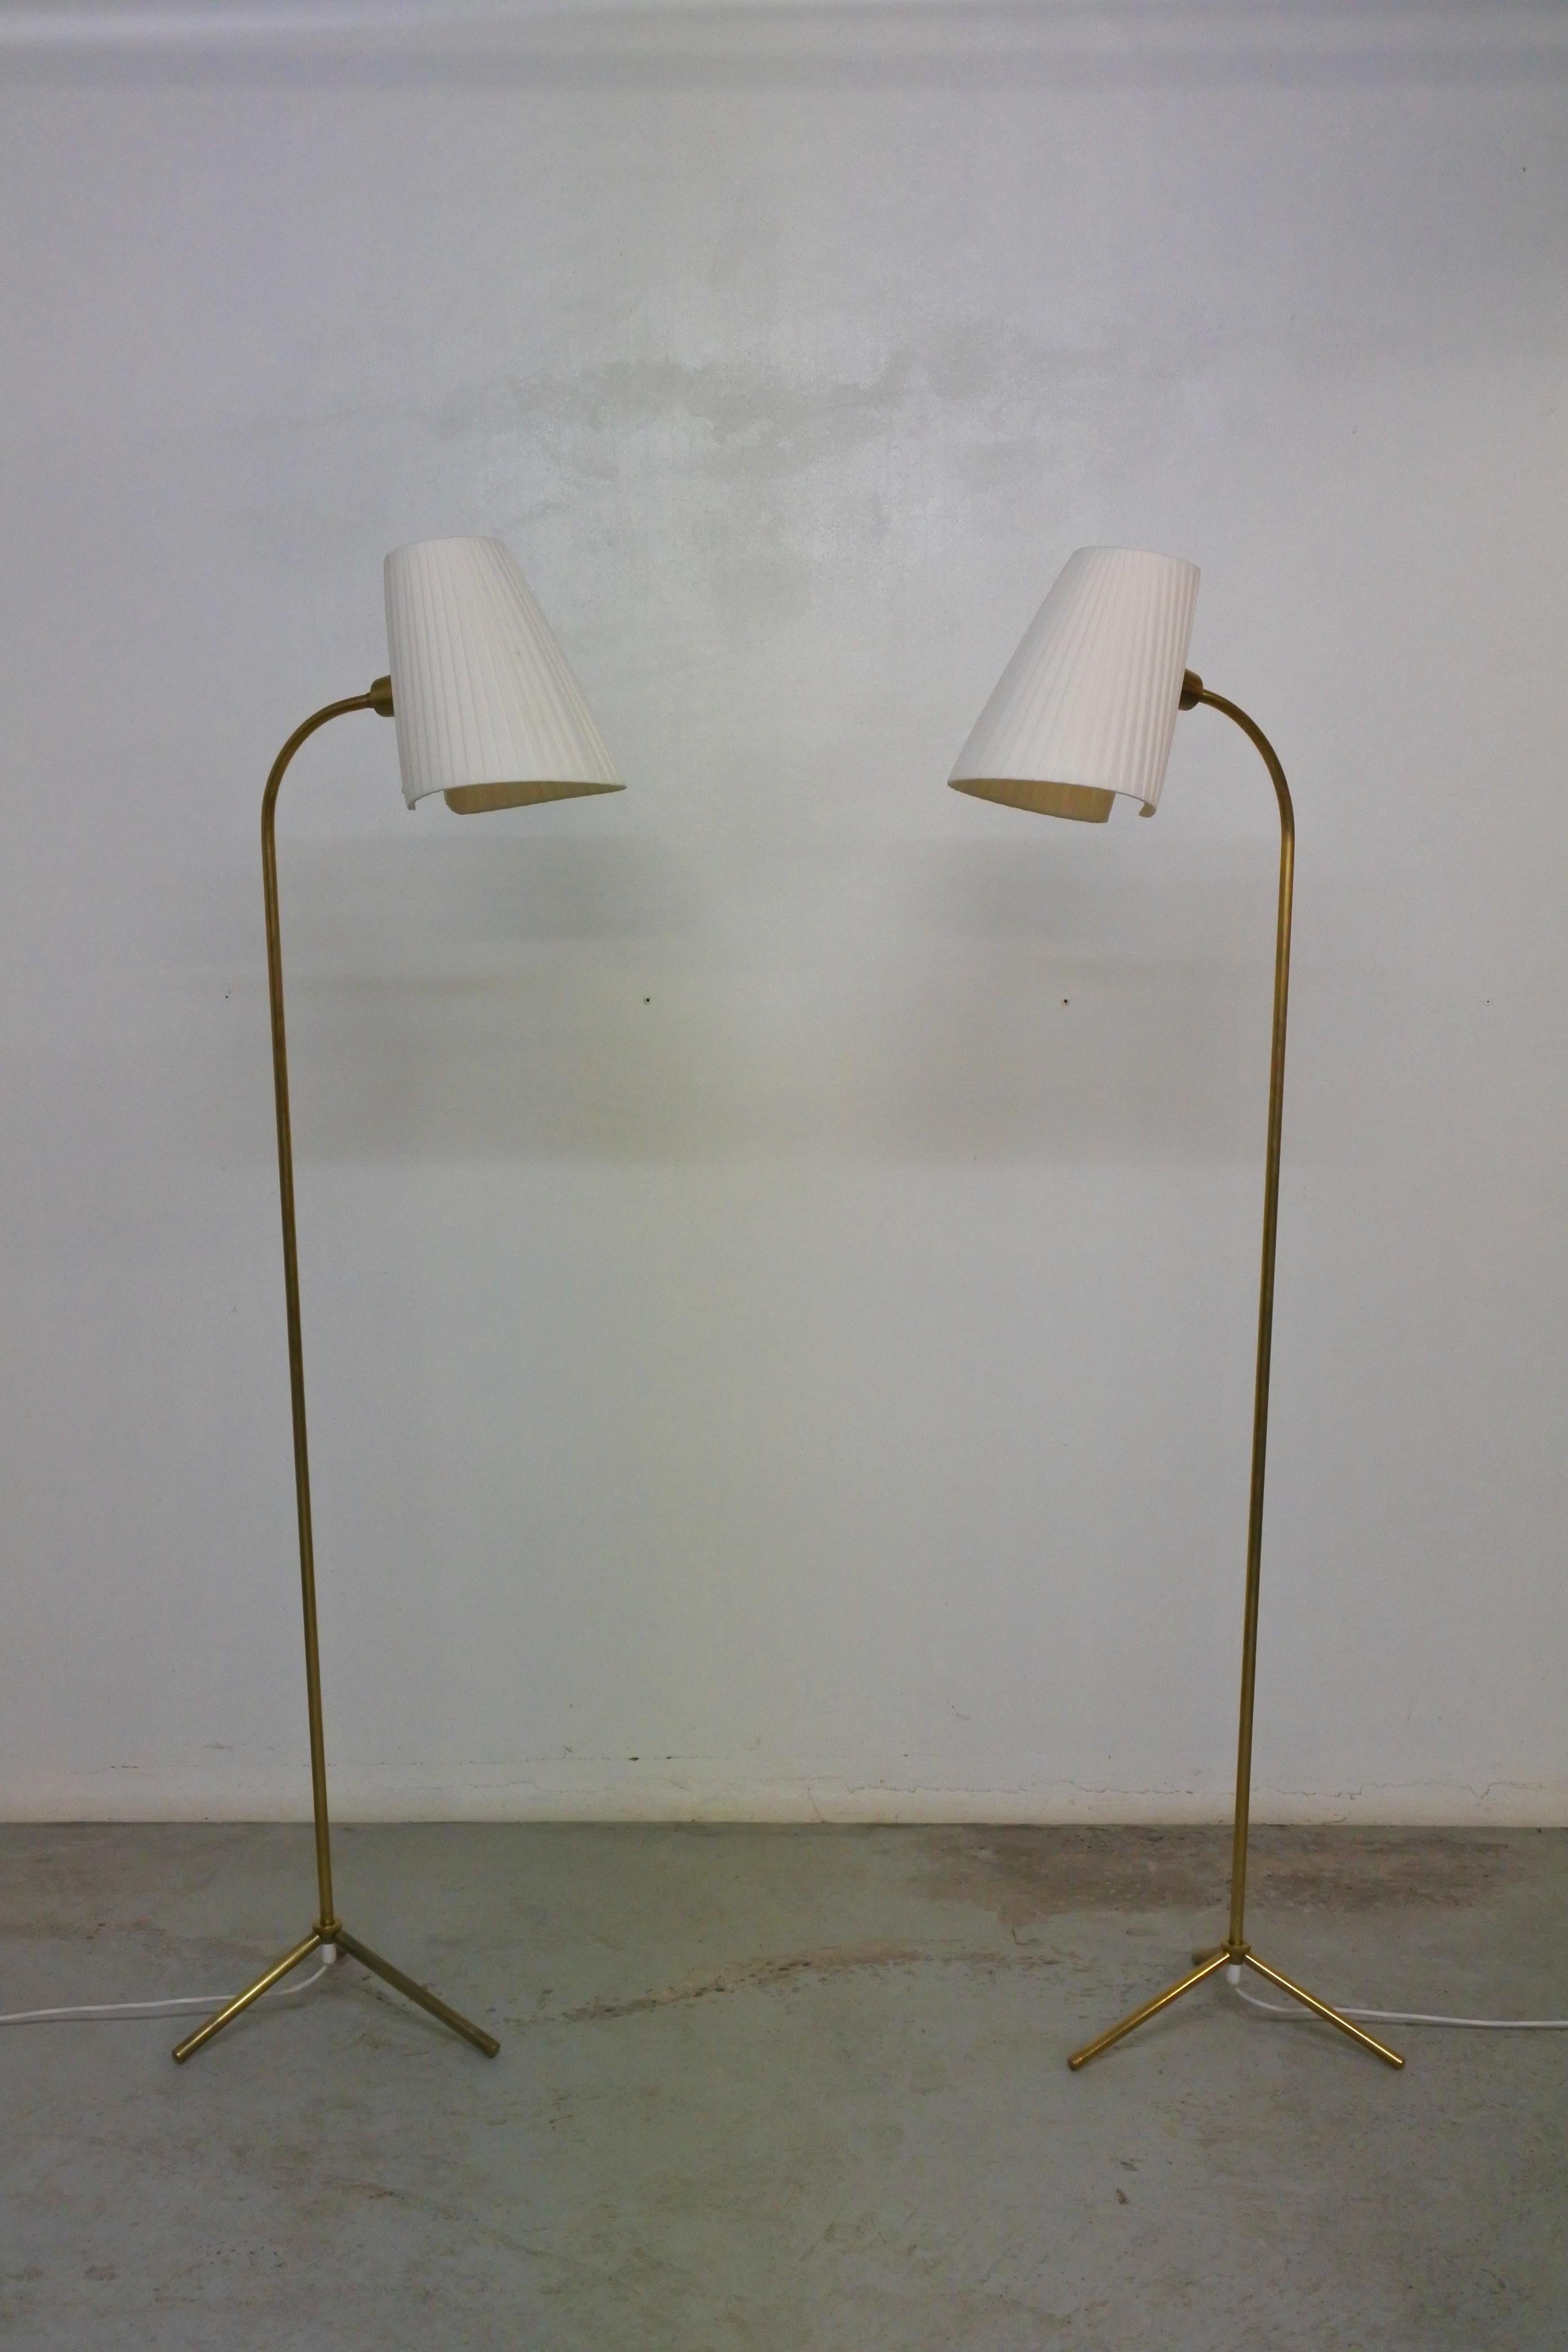 Mid-Century Modern Tripod Floor Lamps in Brass by Lisa Johansson-Pape & Orno, Finland 1950s For Sale